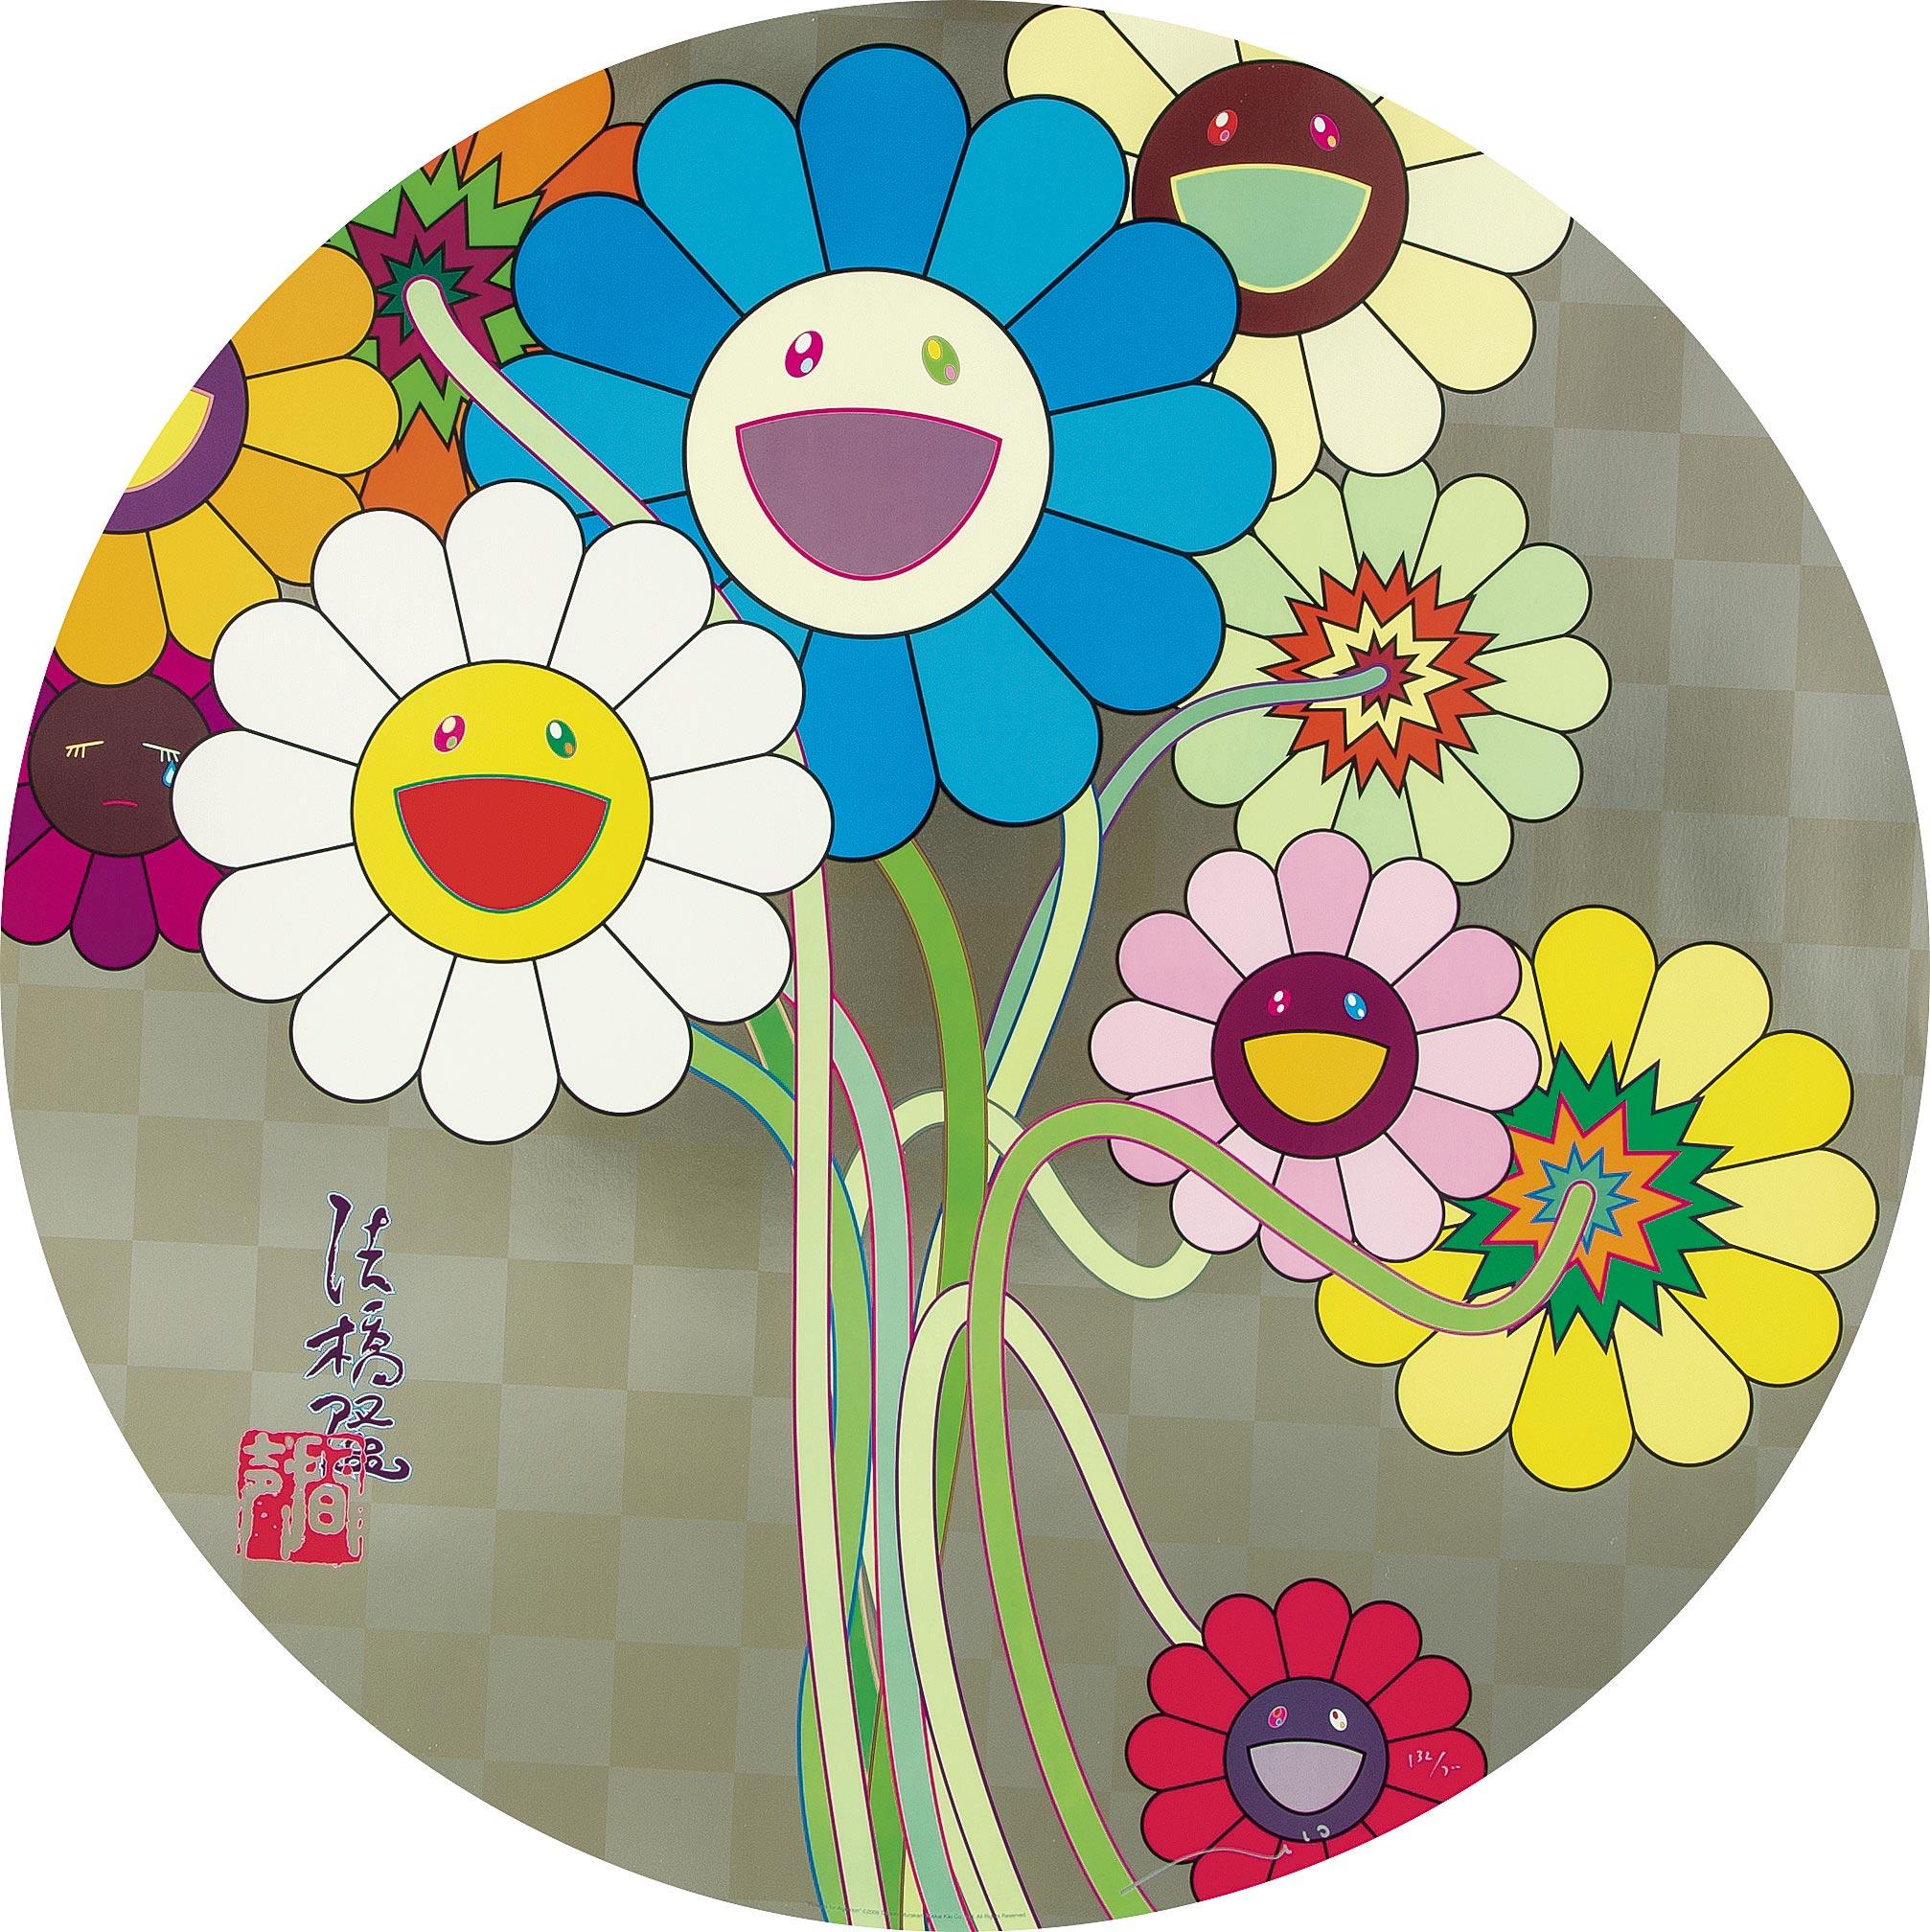 Flowers for Algernon
2009 by Takashi Murakami
Offset print, cold stamp and high gloss varnishing with silver ink
signed, numbered and stamped by the Artist
27 7/8 in diameter
71 cm diameter
Edition  132/300

Takashi Murakami is best known for his